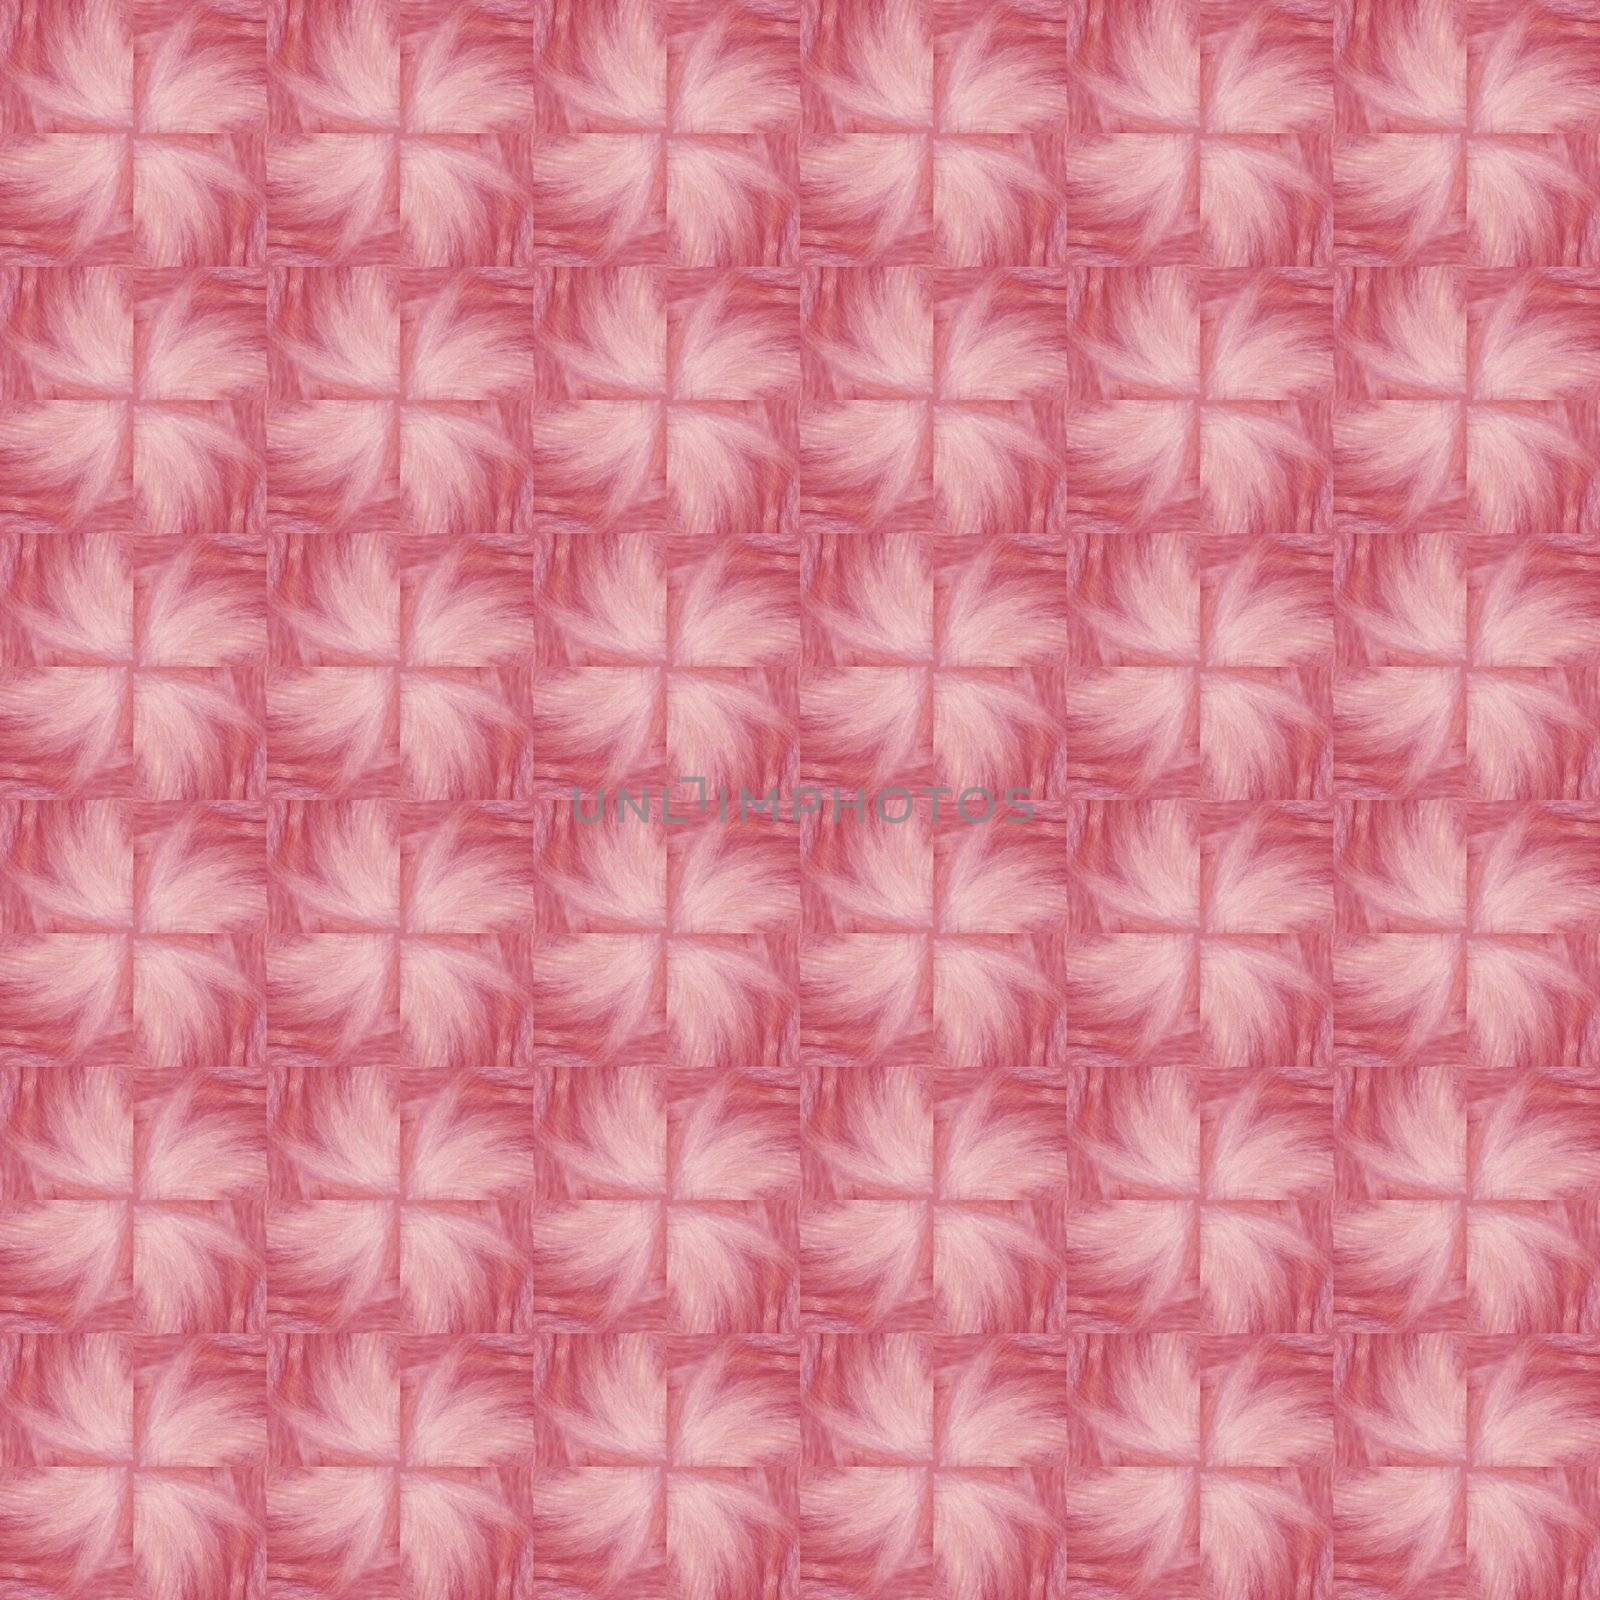 Seamless tileable background. Big pink fur flowers retro texture with an old-fashioned twist